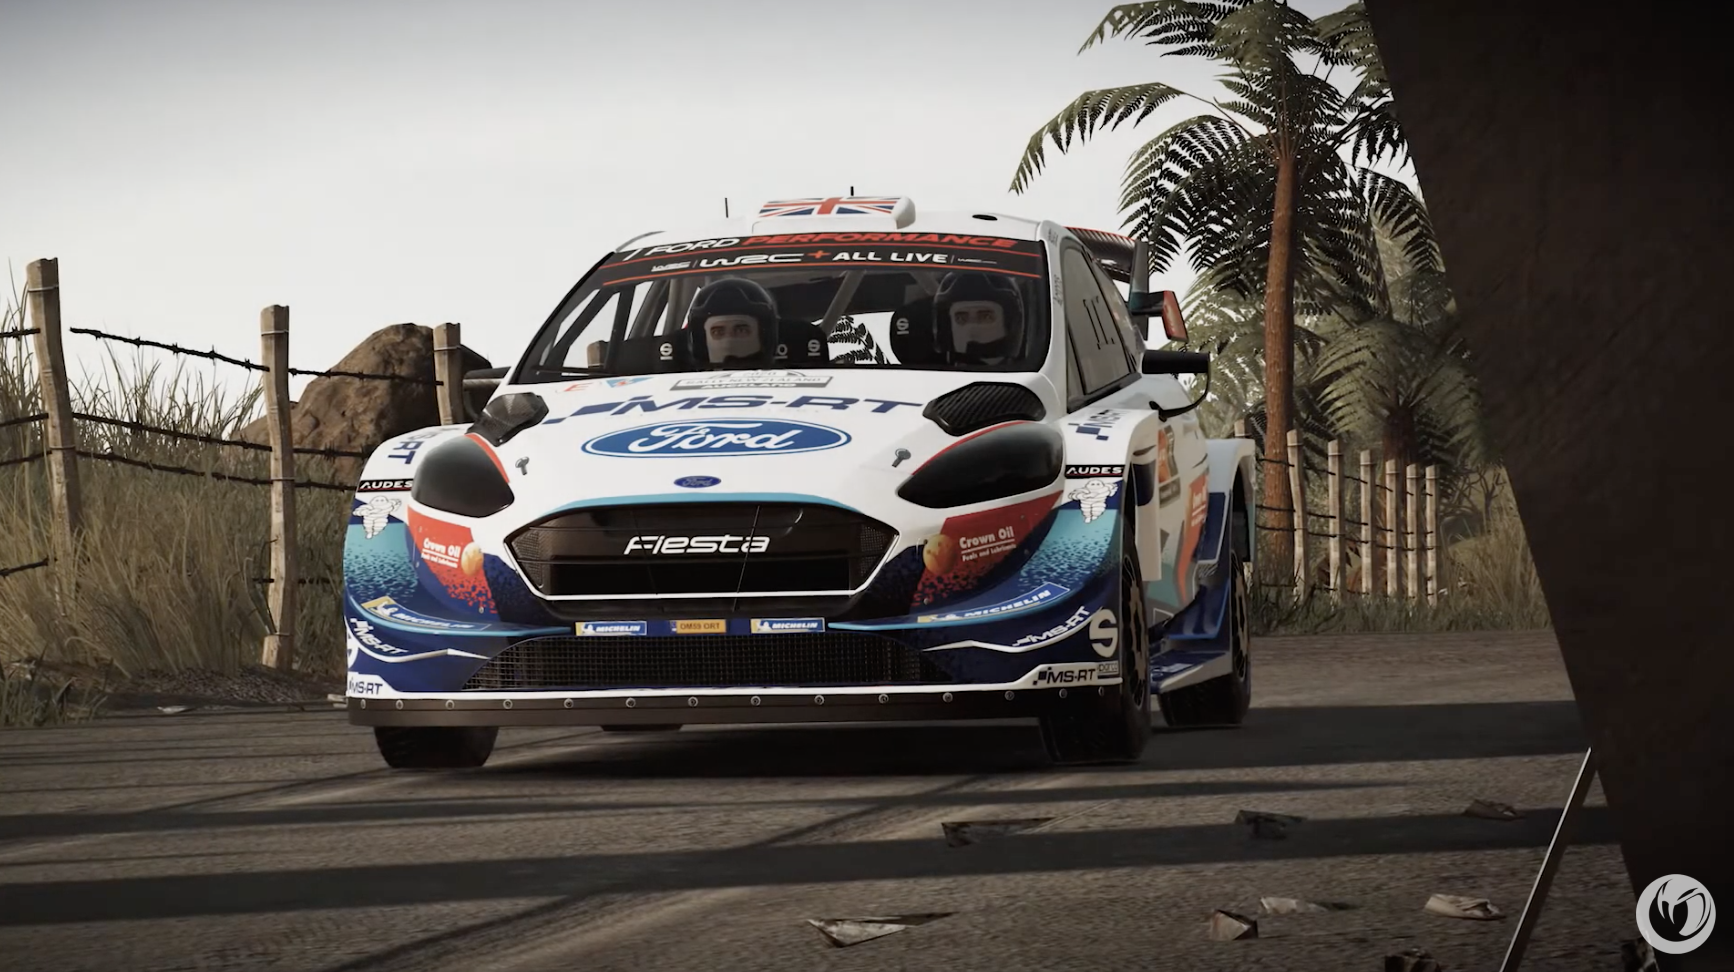 Codemasters Secures the to Rally Through FIA - Rights 2023 From World License, 2027 the Operation Sports Championship